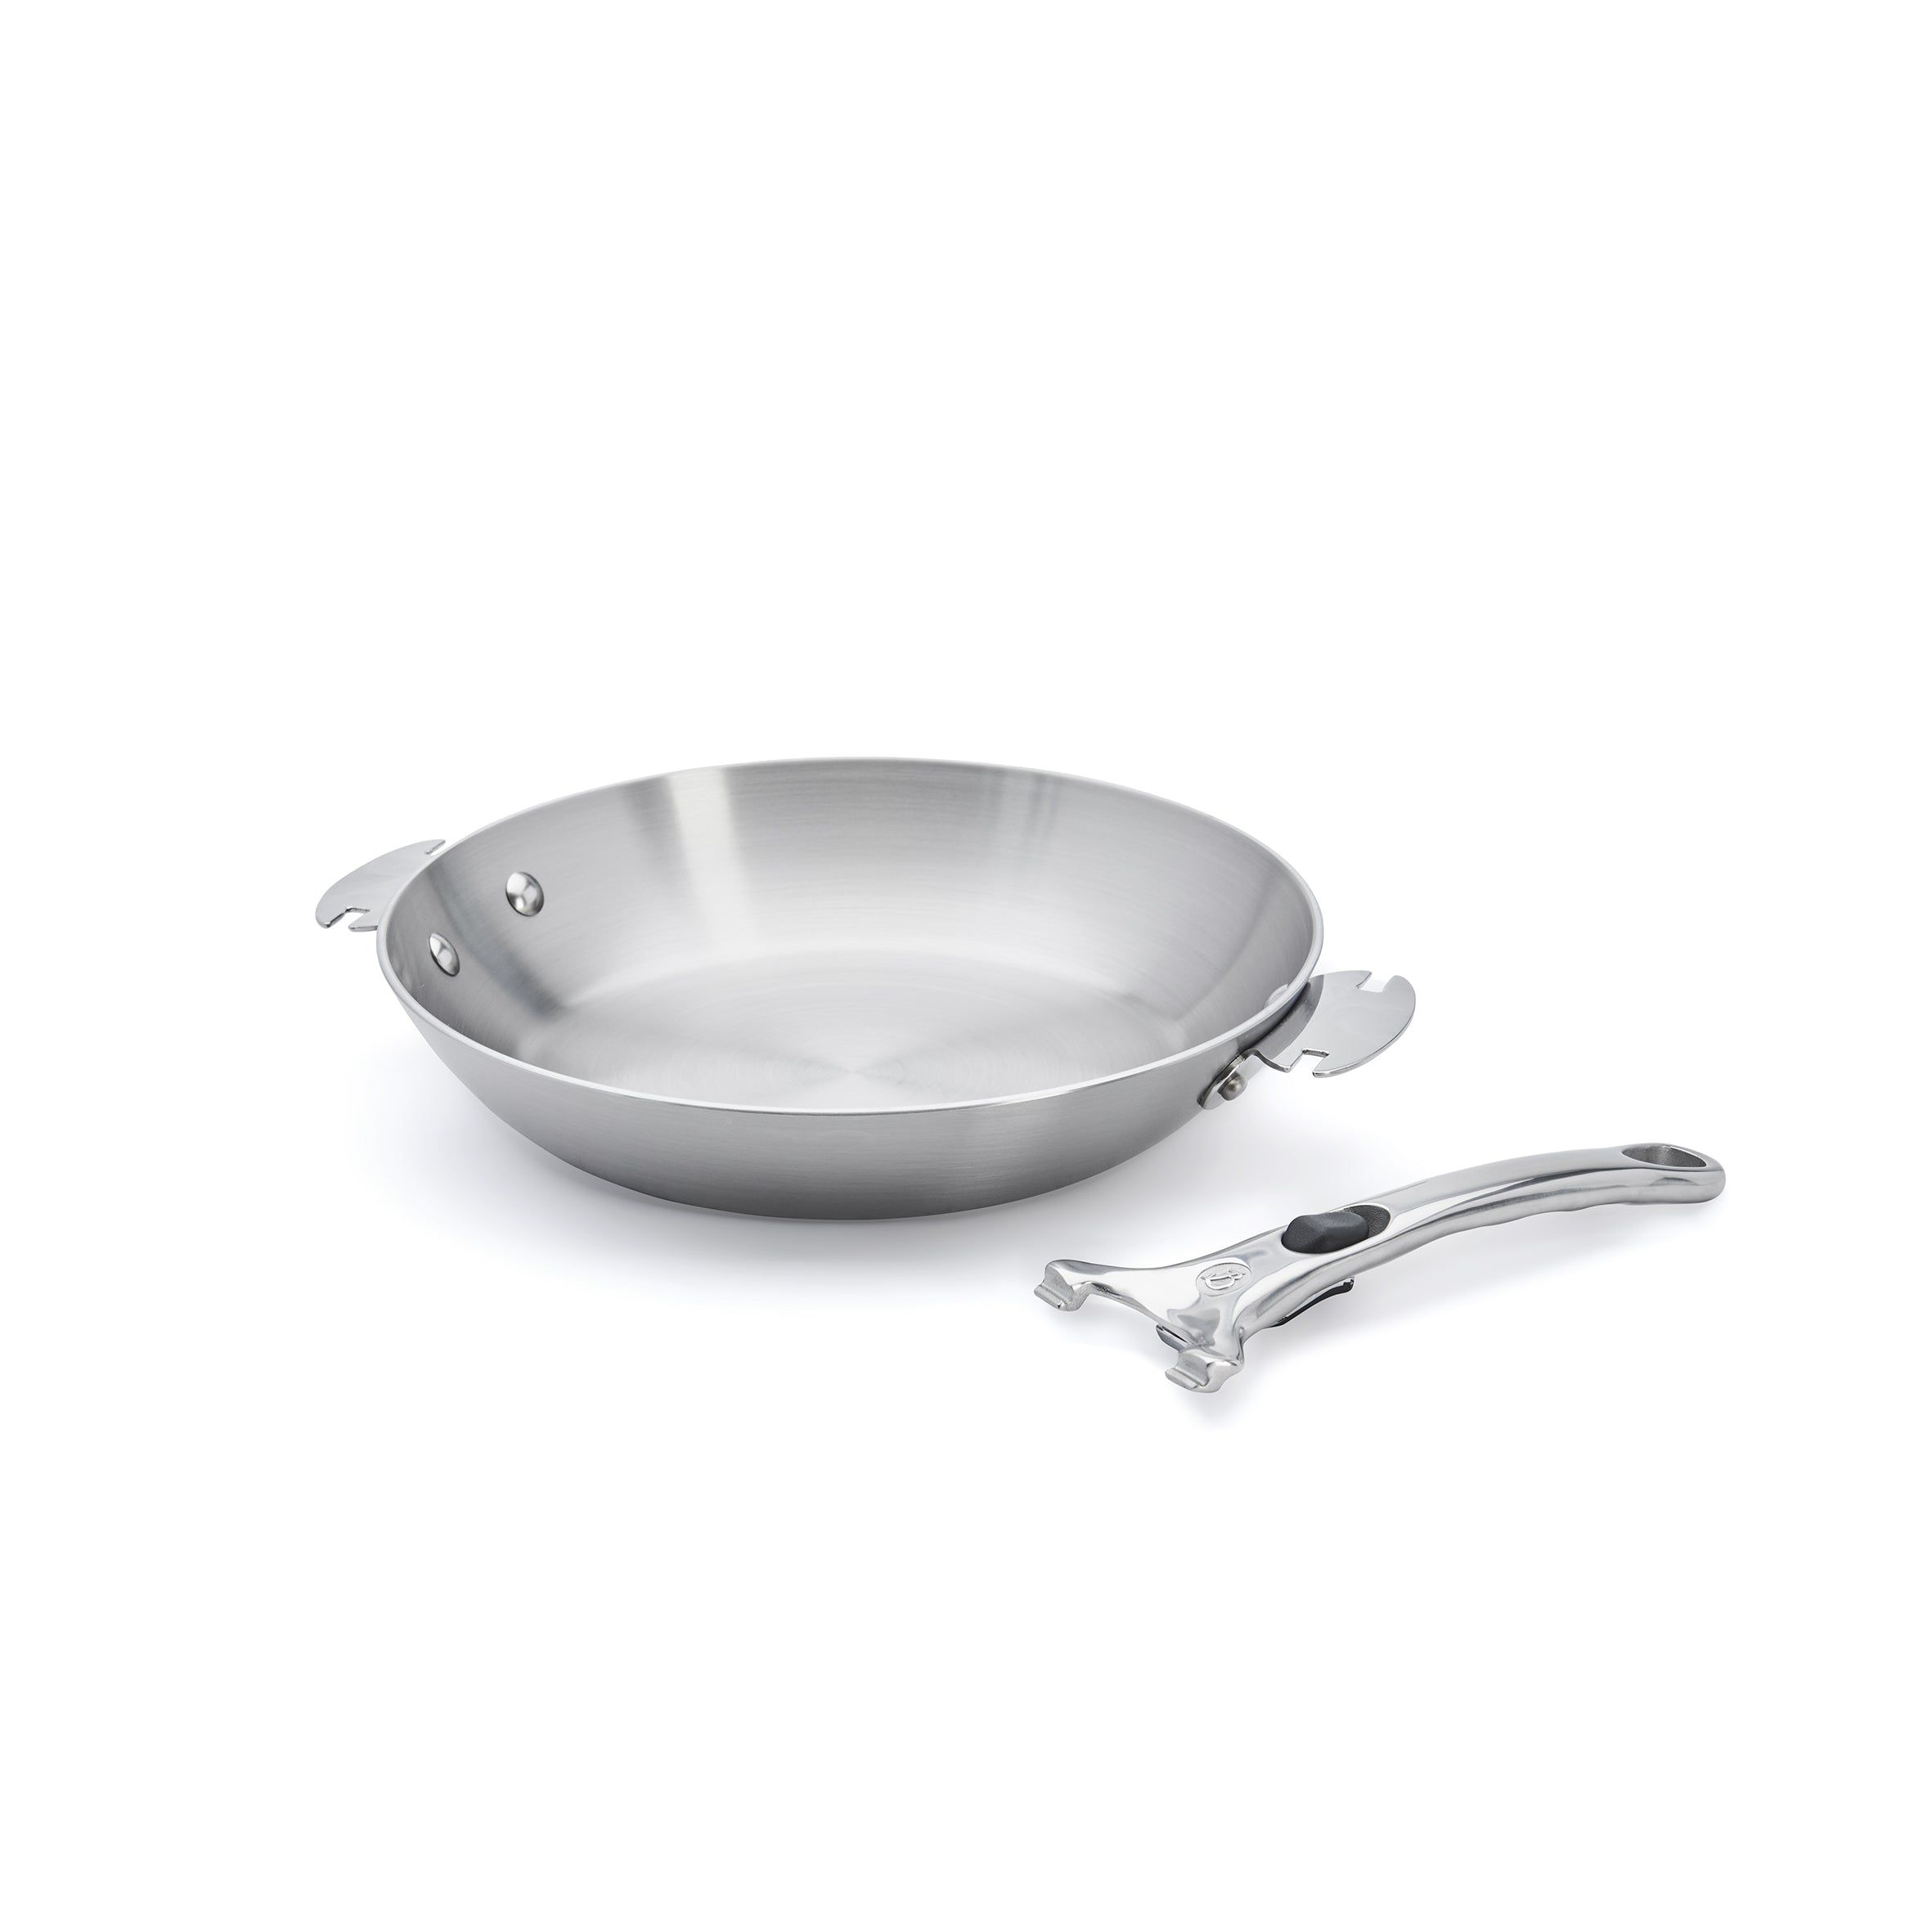 ALCHIMY Stainless Steel Frying Pan - LOQY System